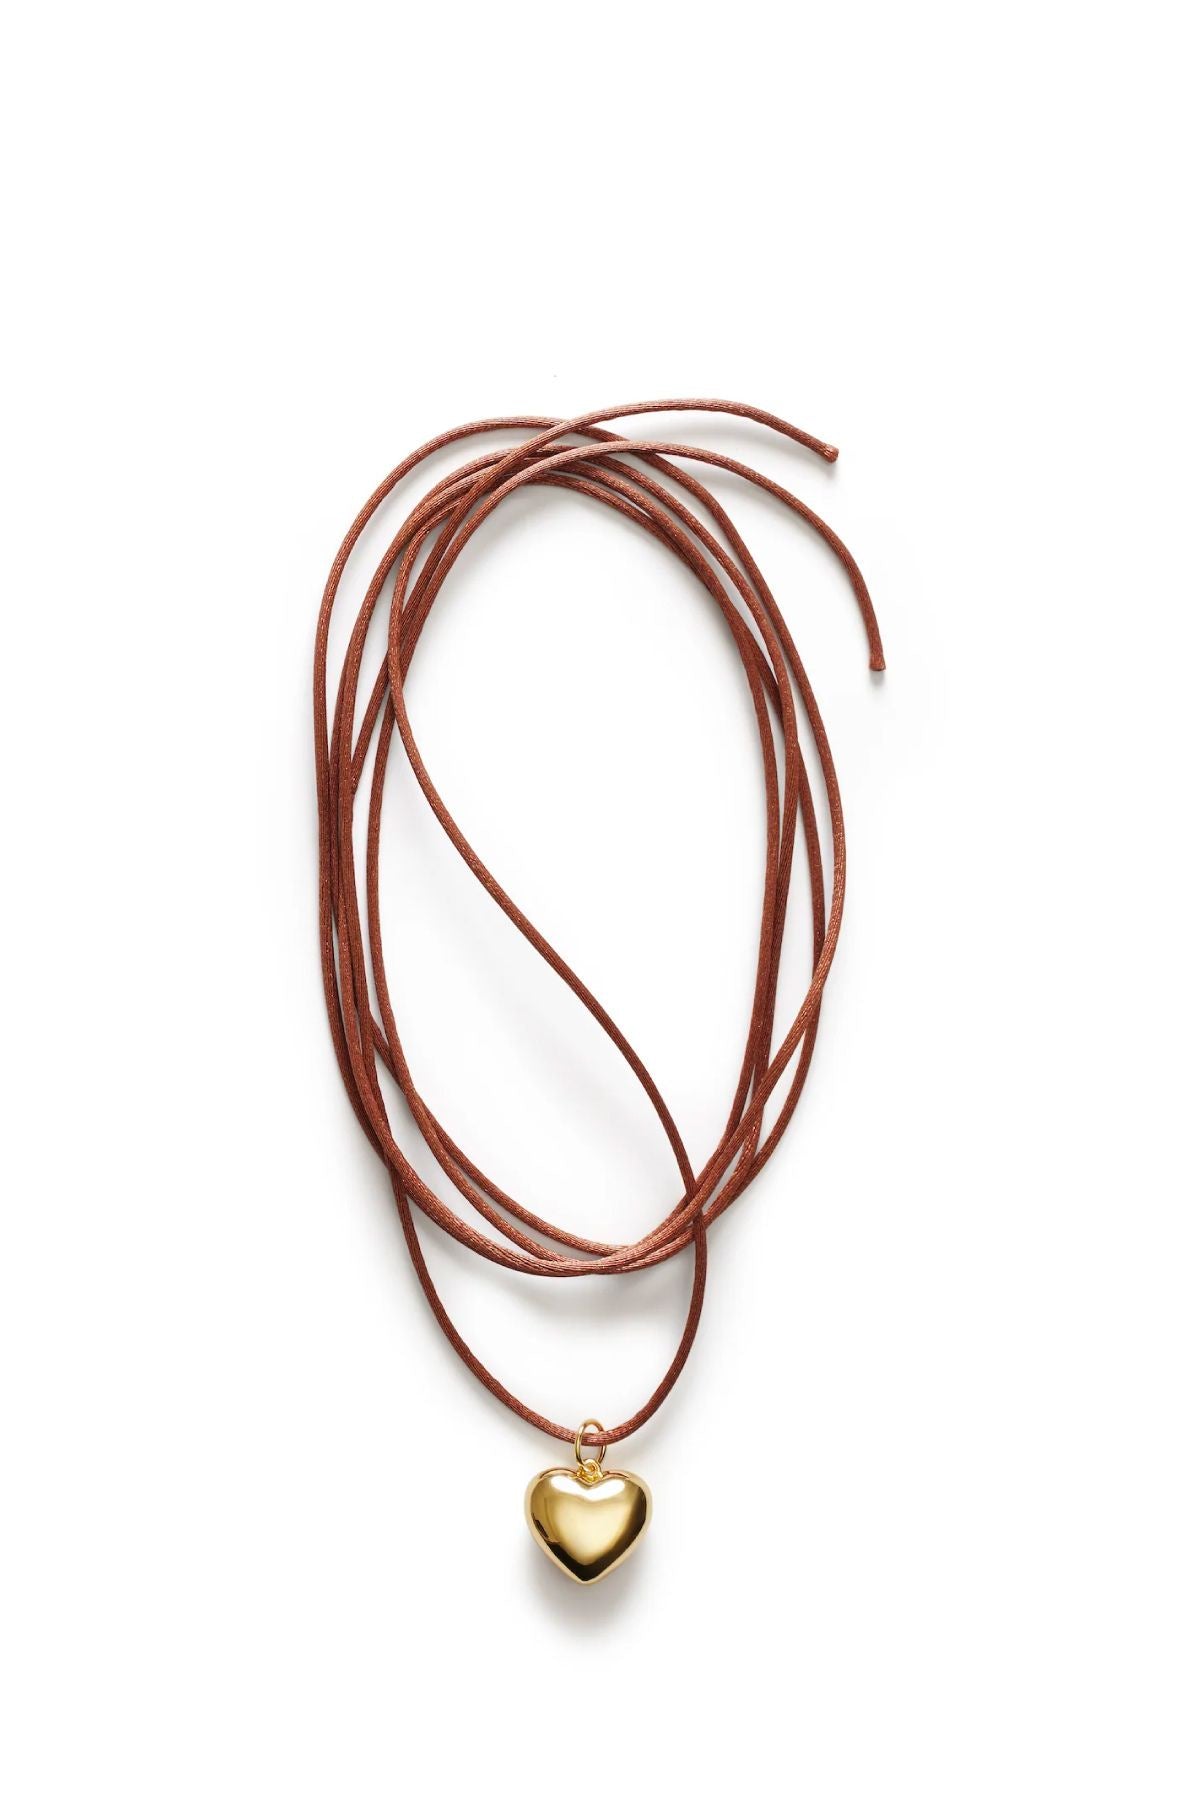 Anni Lu Heart on A String Necklace - Gold